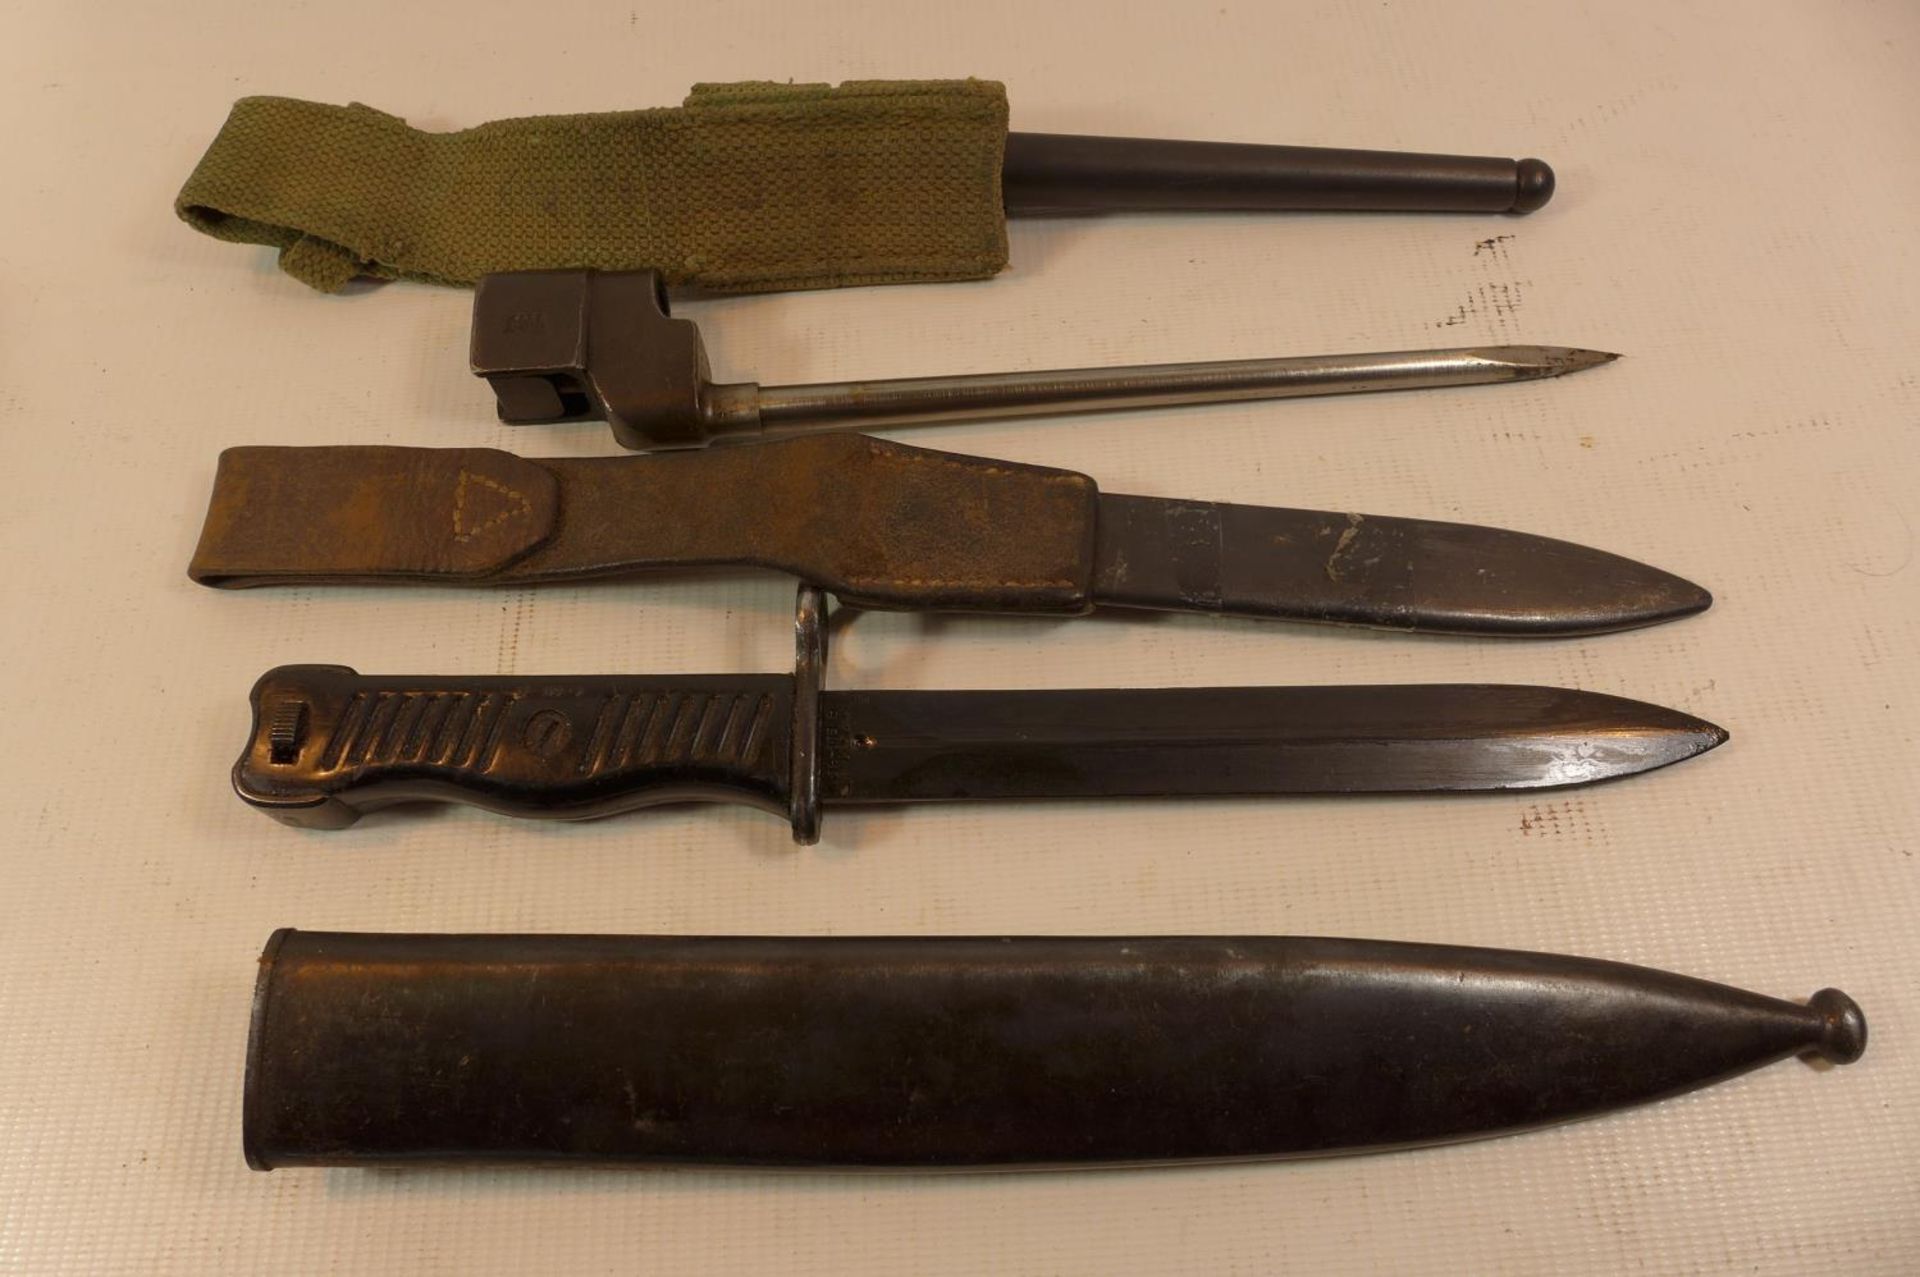 A YUGOSLAVIAN M56 BAYONET FOR RM1956 SUB MACHINE GUN, 17.5CM BLADE, COMPELTE WITH FROG, MARK II - Image 2 of 4